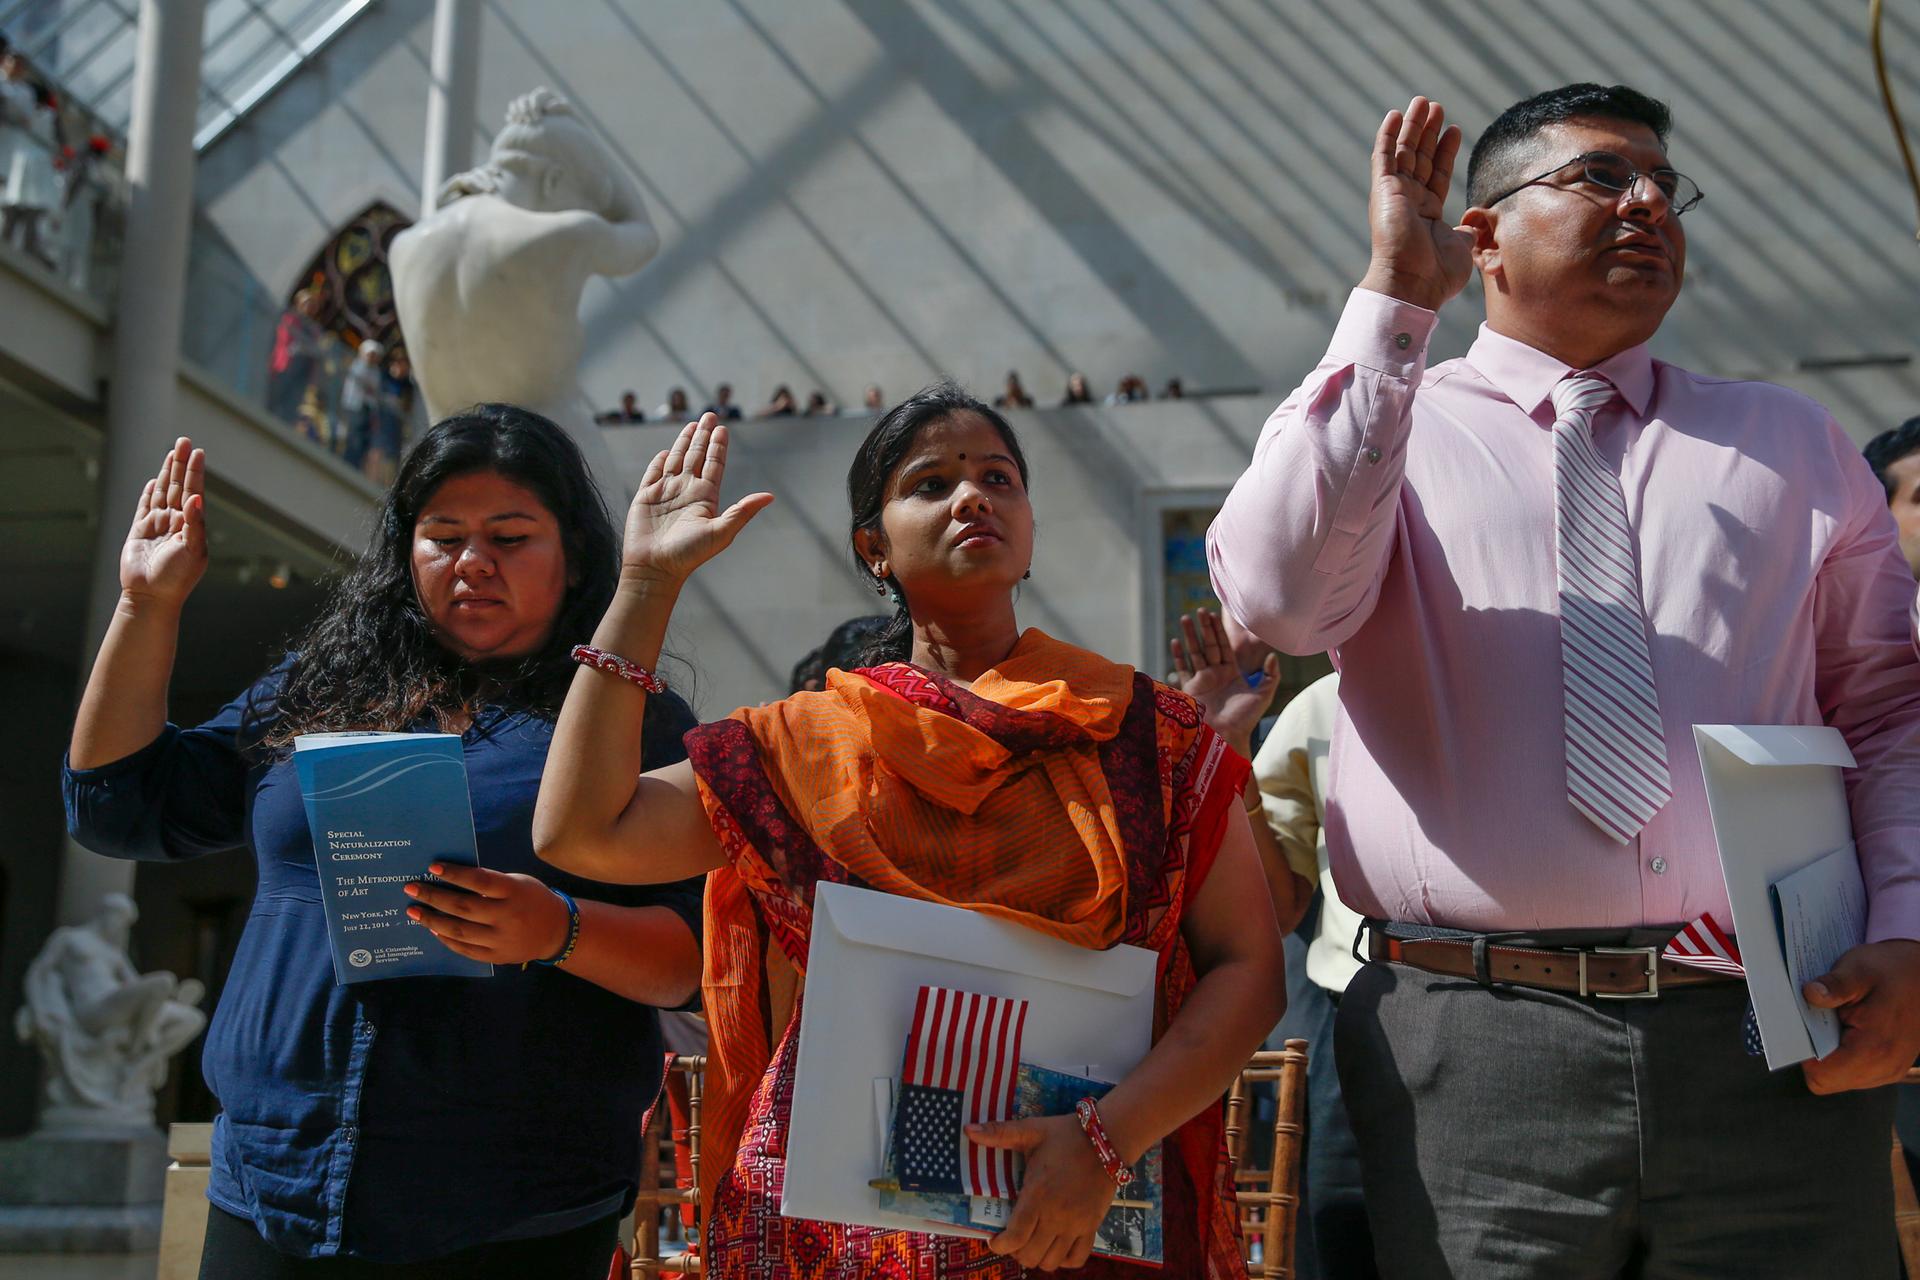 New American citizens (L to R) Leslie Tapia, from Mexico, Sanzida Khanam, from Bangladesh and Pablo Espinales, from Ecuador, raise their hands for the Pledge of Allegiance during a naturalization ceremony at The Metropolitan Museum of Art in New York on J